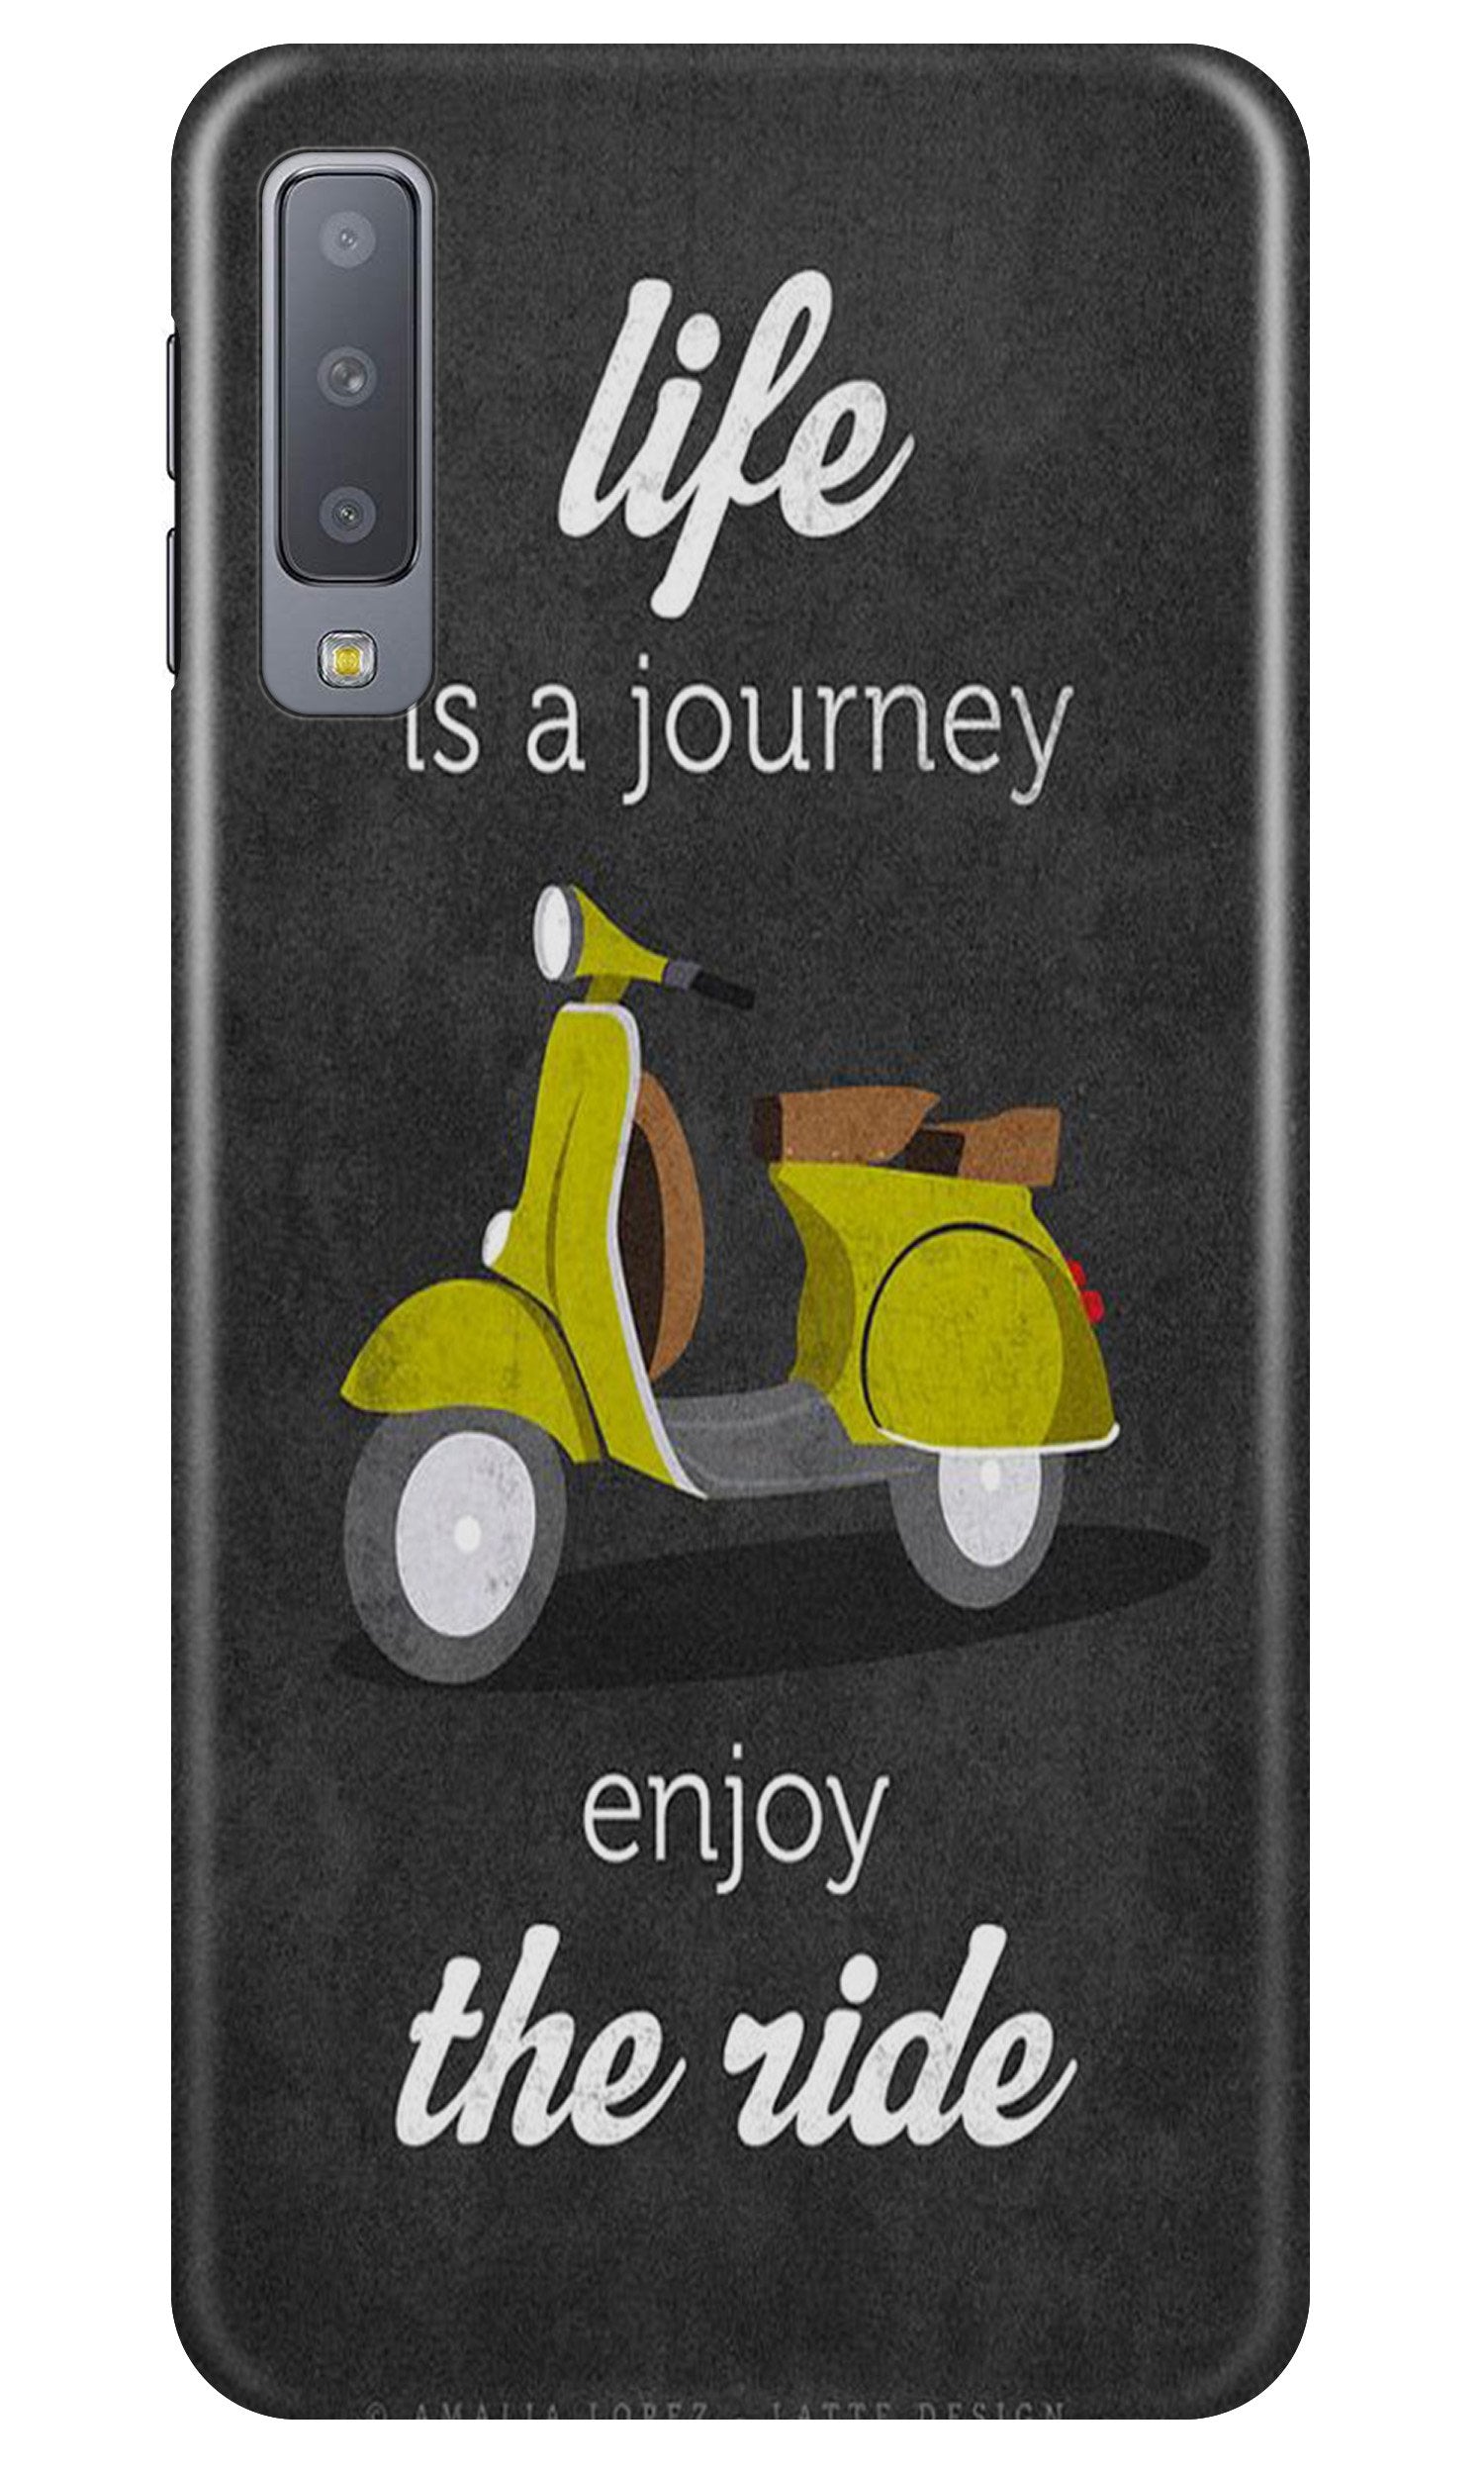 Life is a Journey Case for Samung Galaxy A70s (Design No. 261)